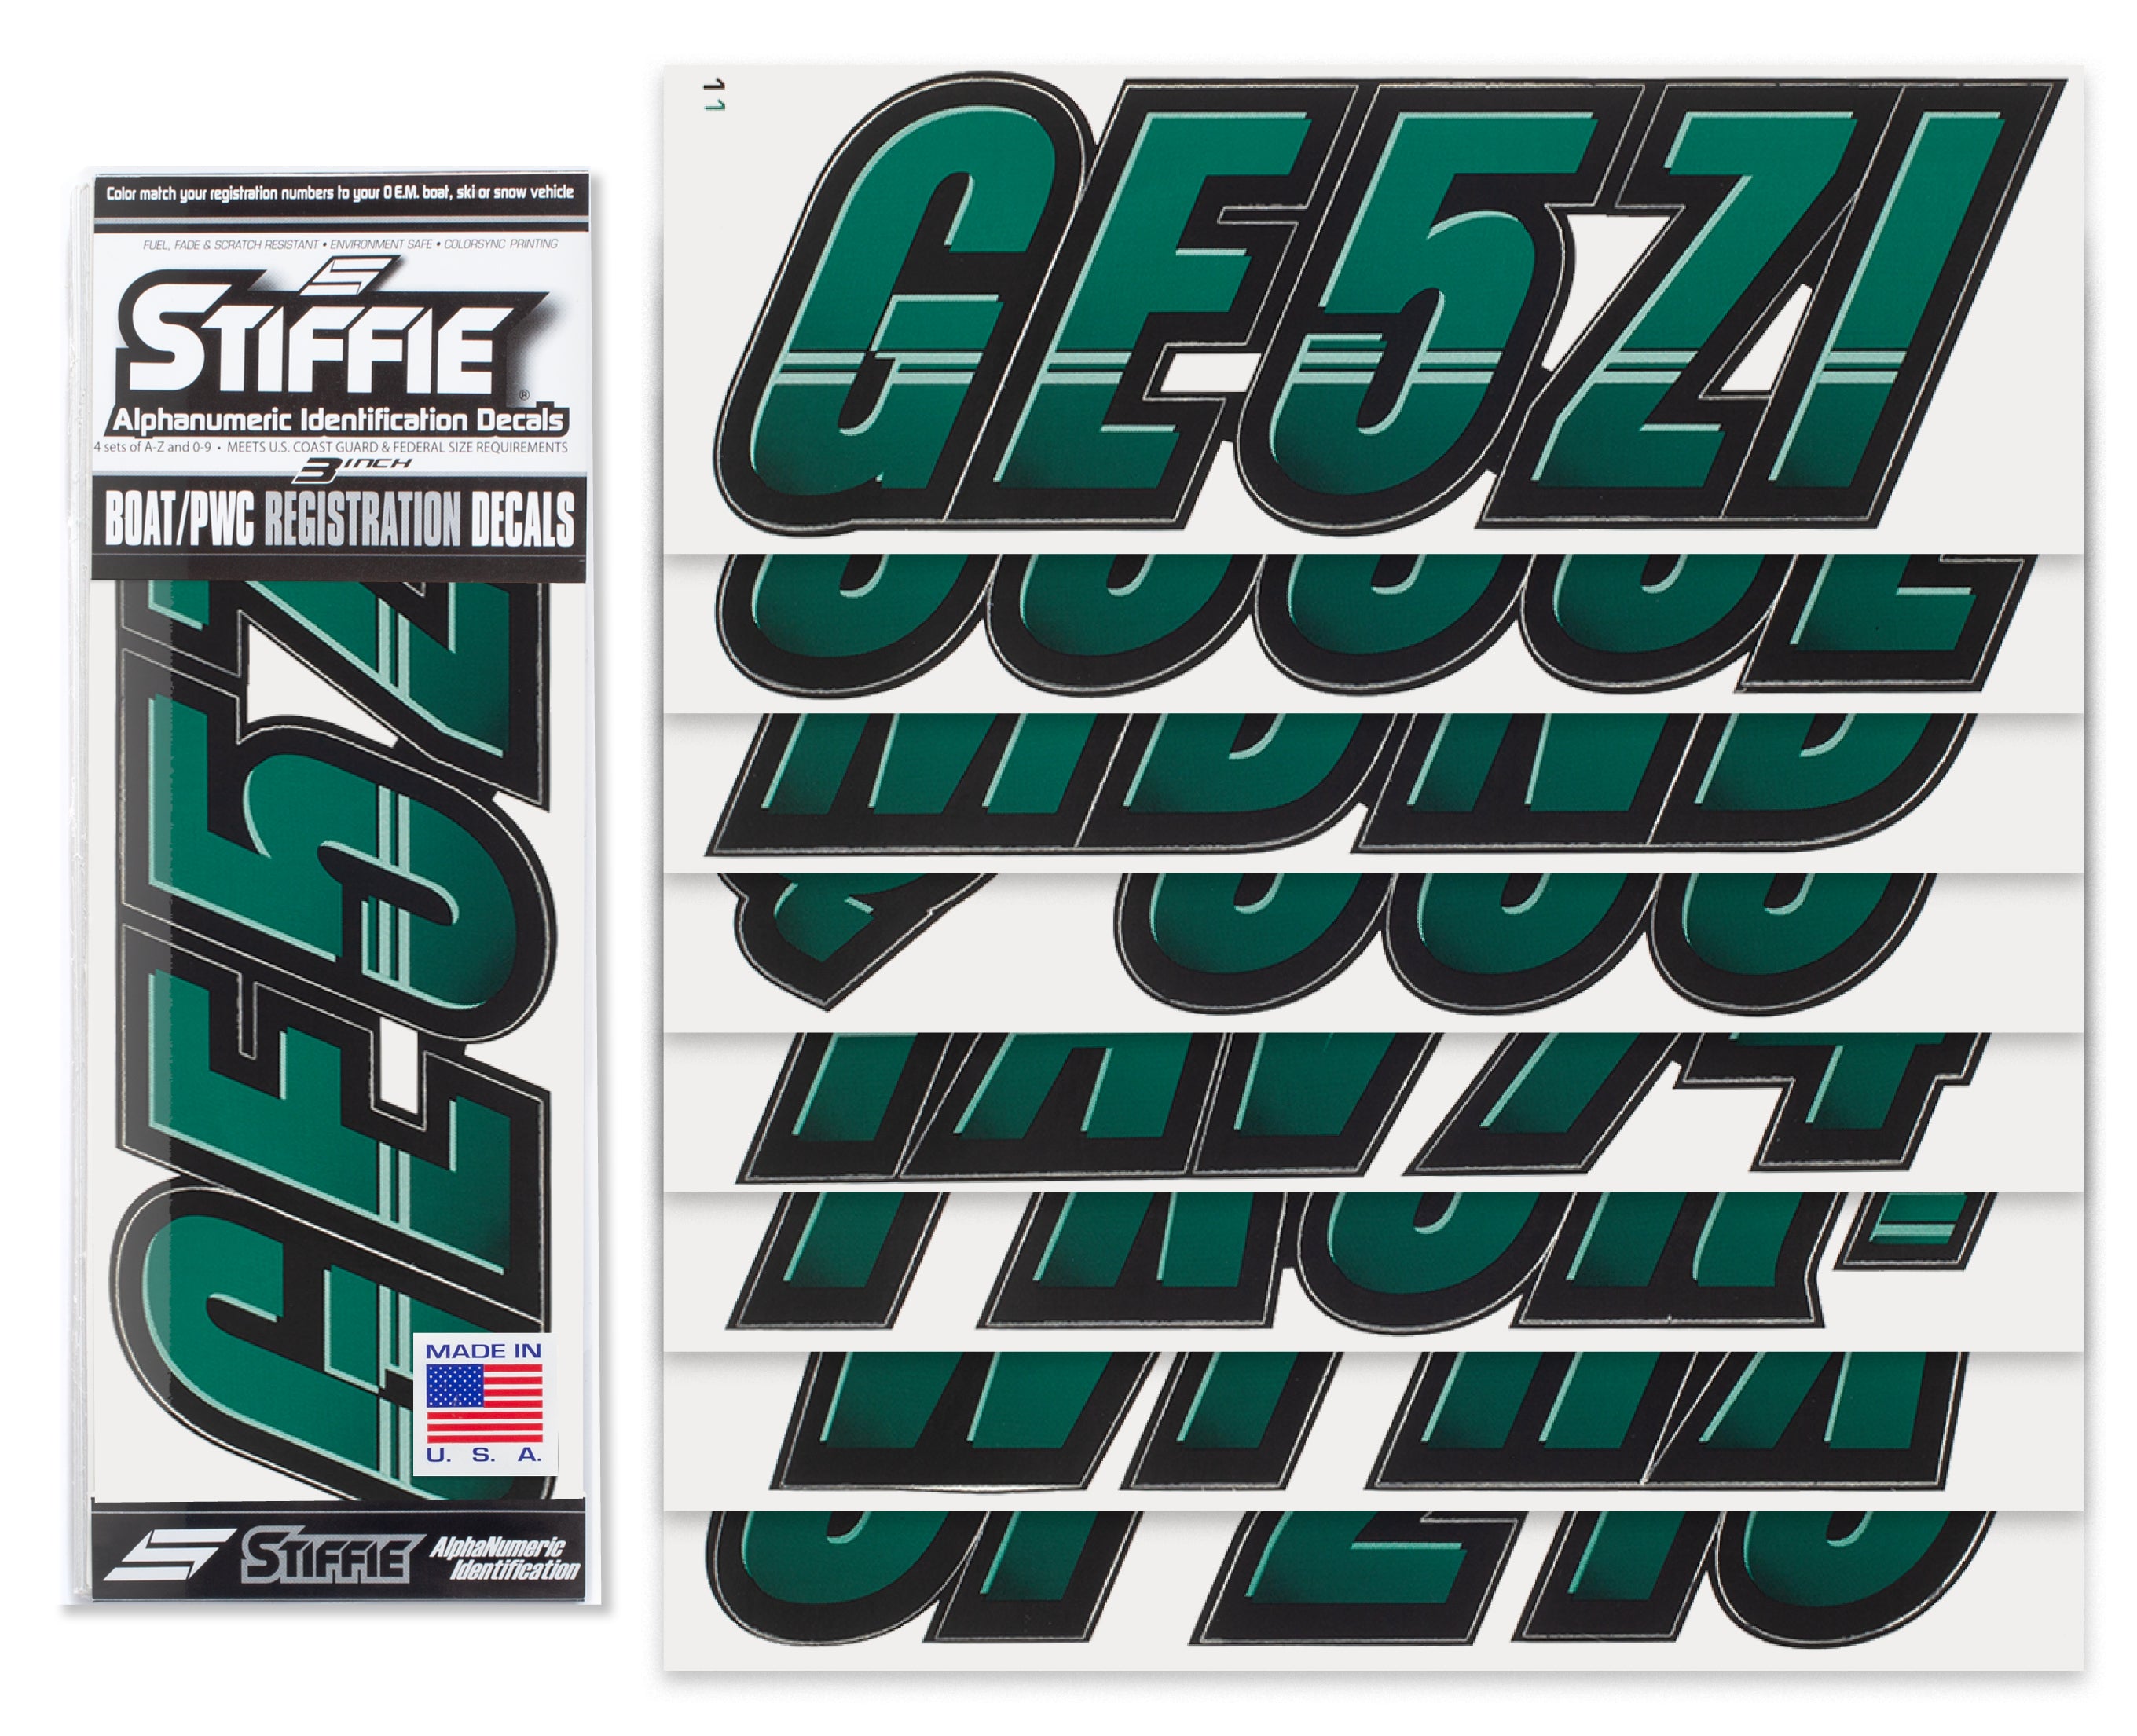 STIFFIE Techtron Racing Green/Black 3" Alpha-Numeric Registration Identification Numbers Stickers Decals for Boats & Personal Watercraft